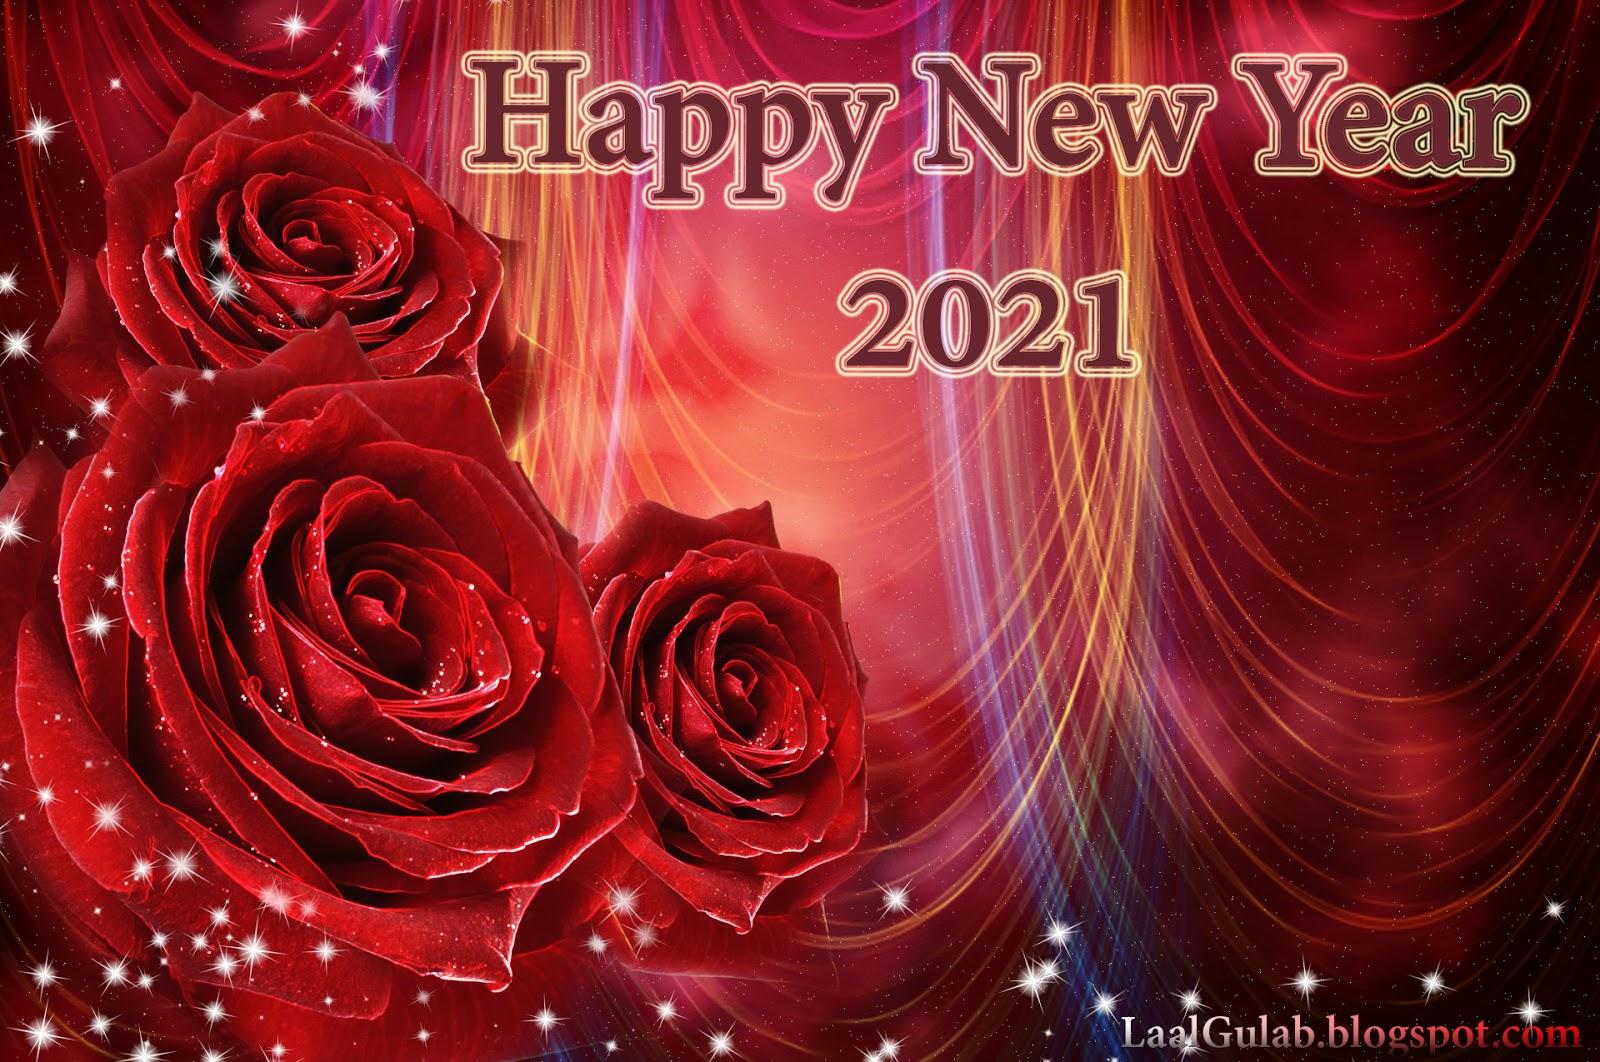 Happy New Year 2021 Wallpapers HD Image 2021 Happy New Year 2021 Wallpapers